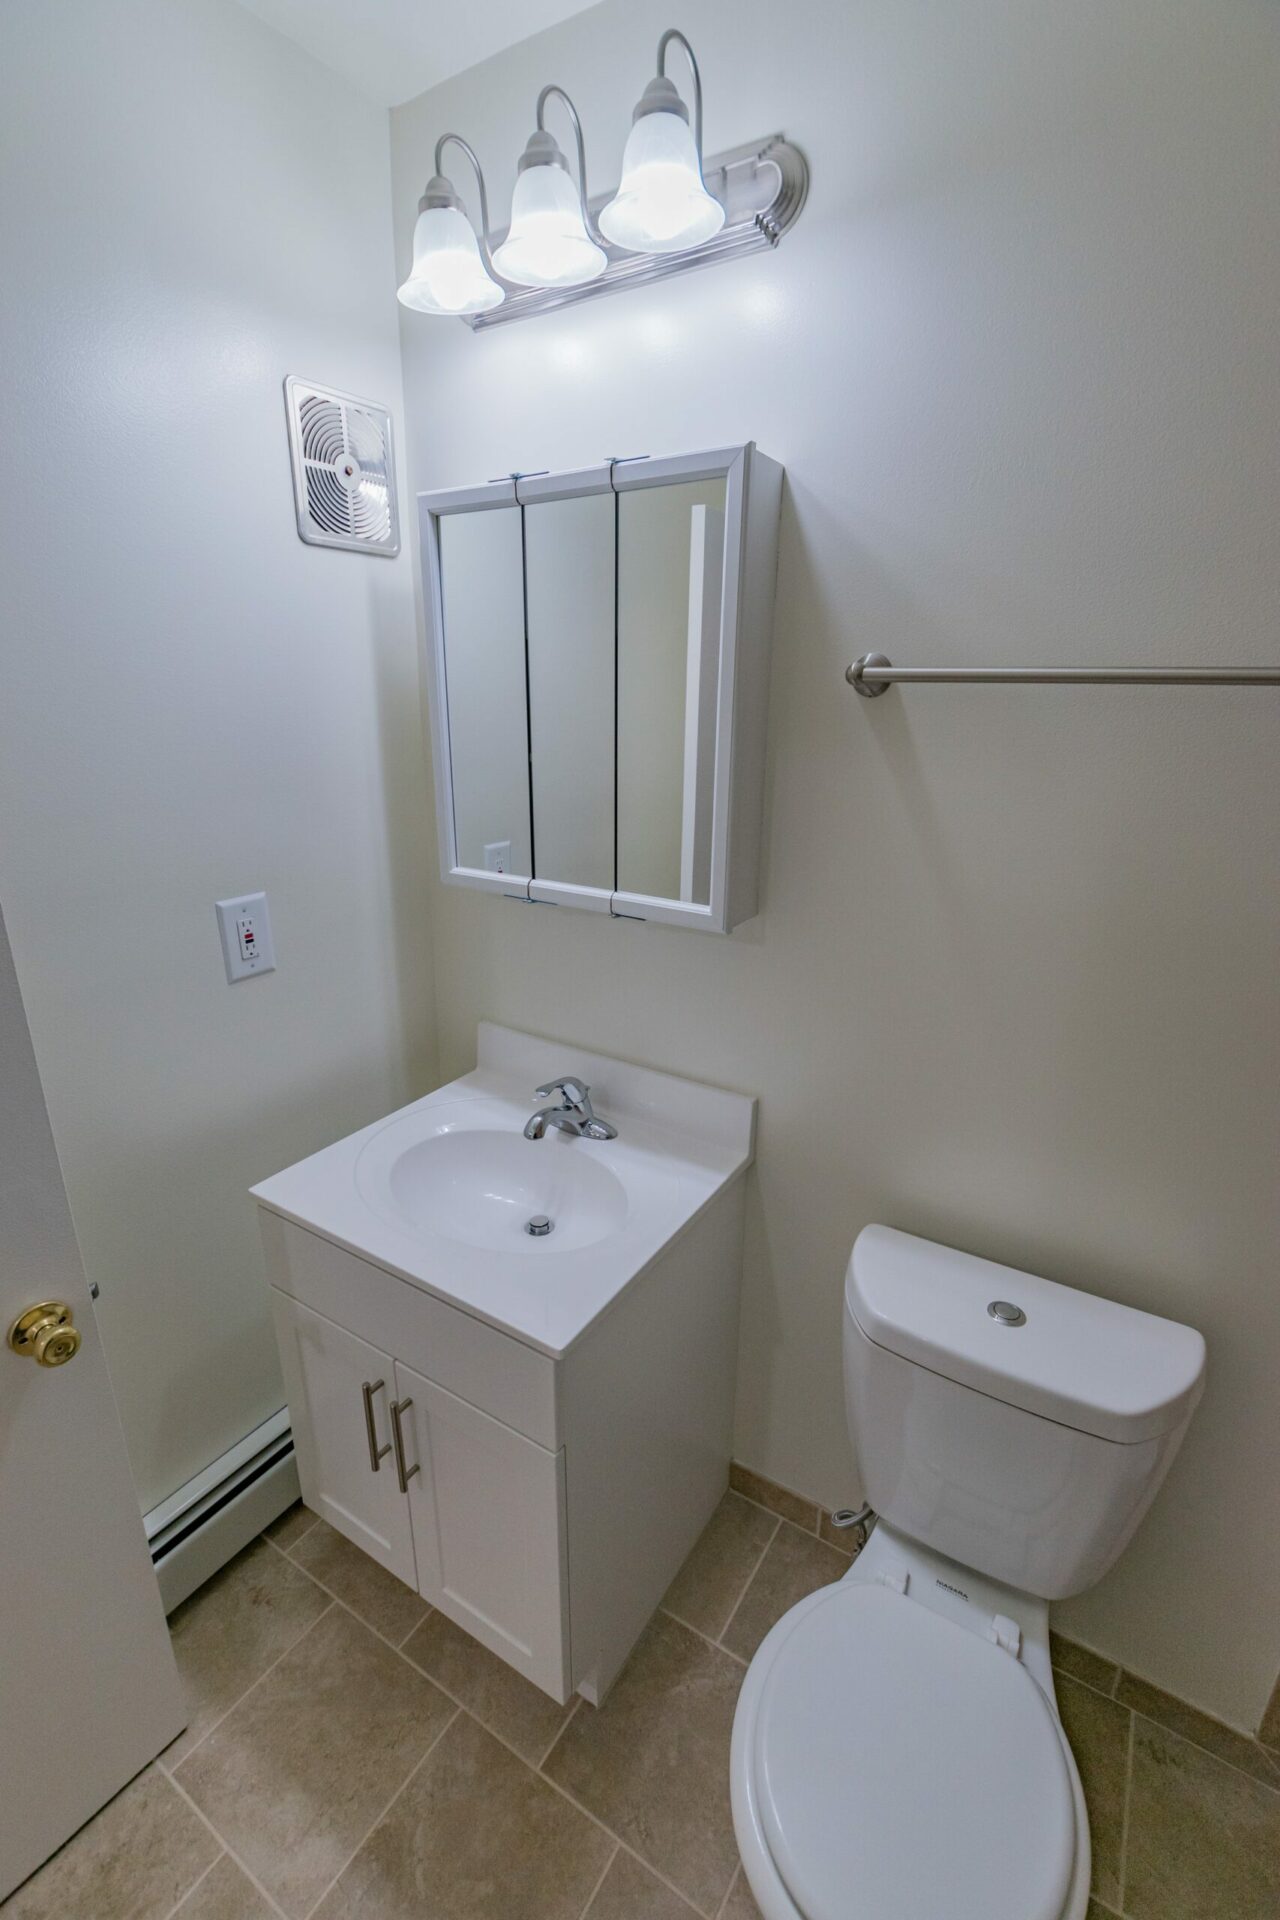 Bathroom area of an apartment, fitted with tiled flooring, single vanity, huge mirror, and a a toilet